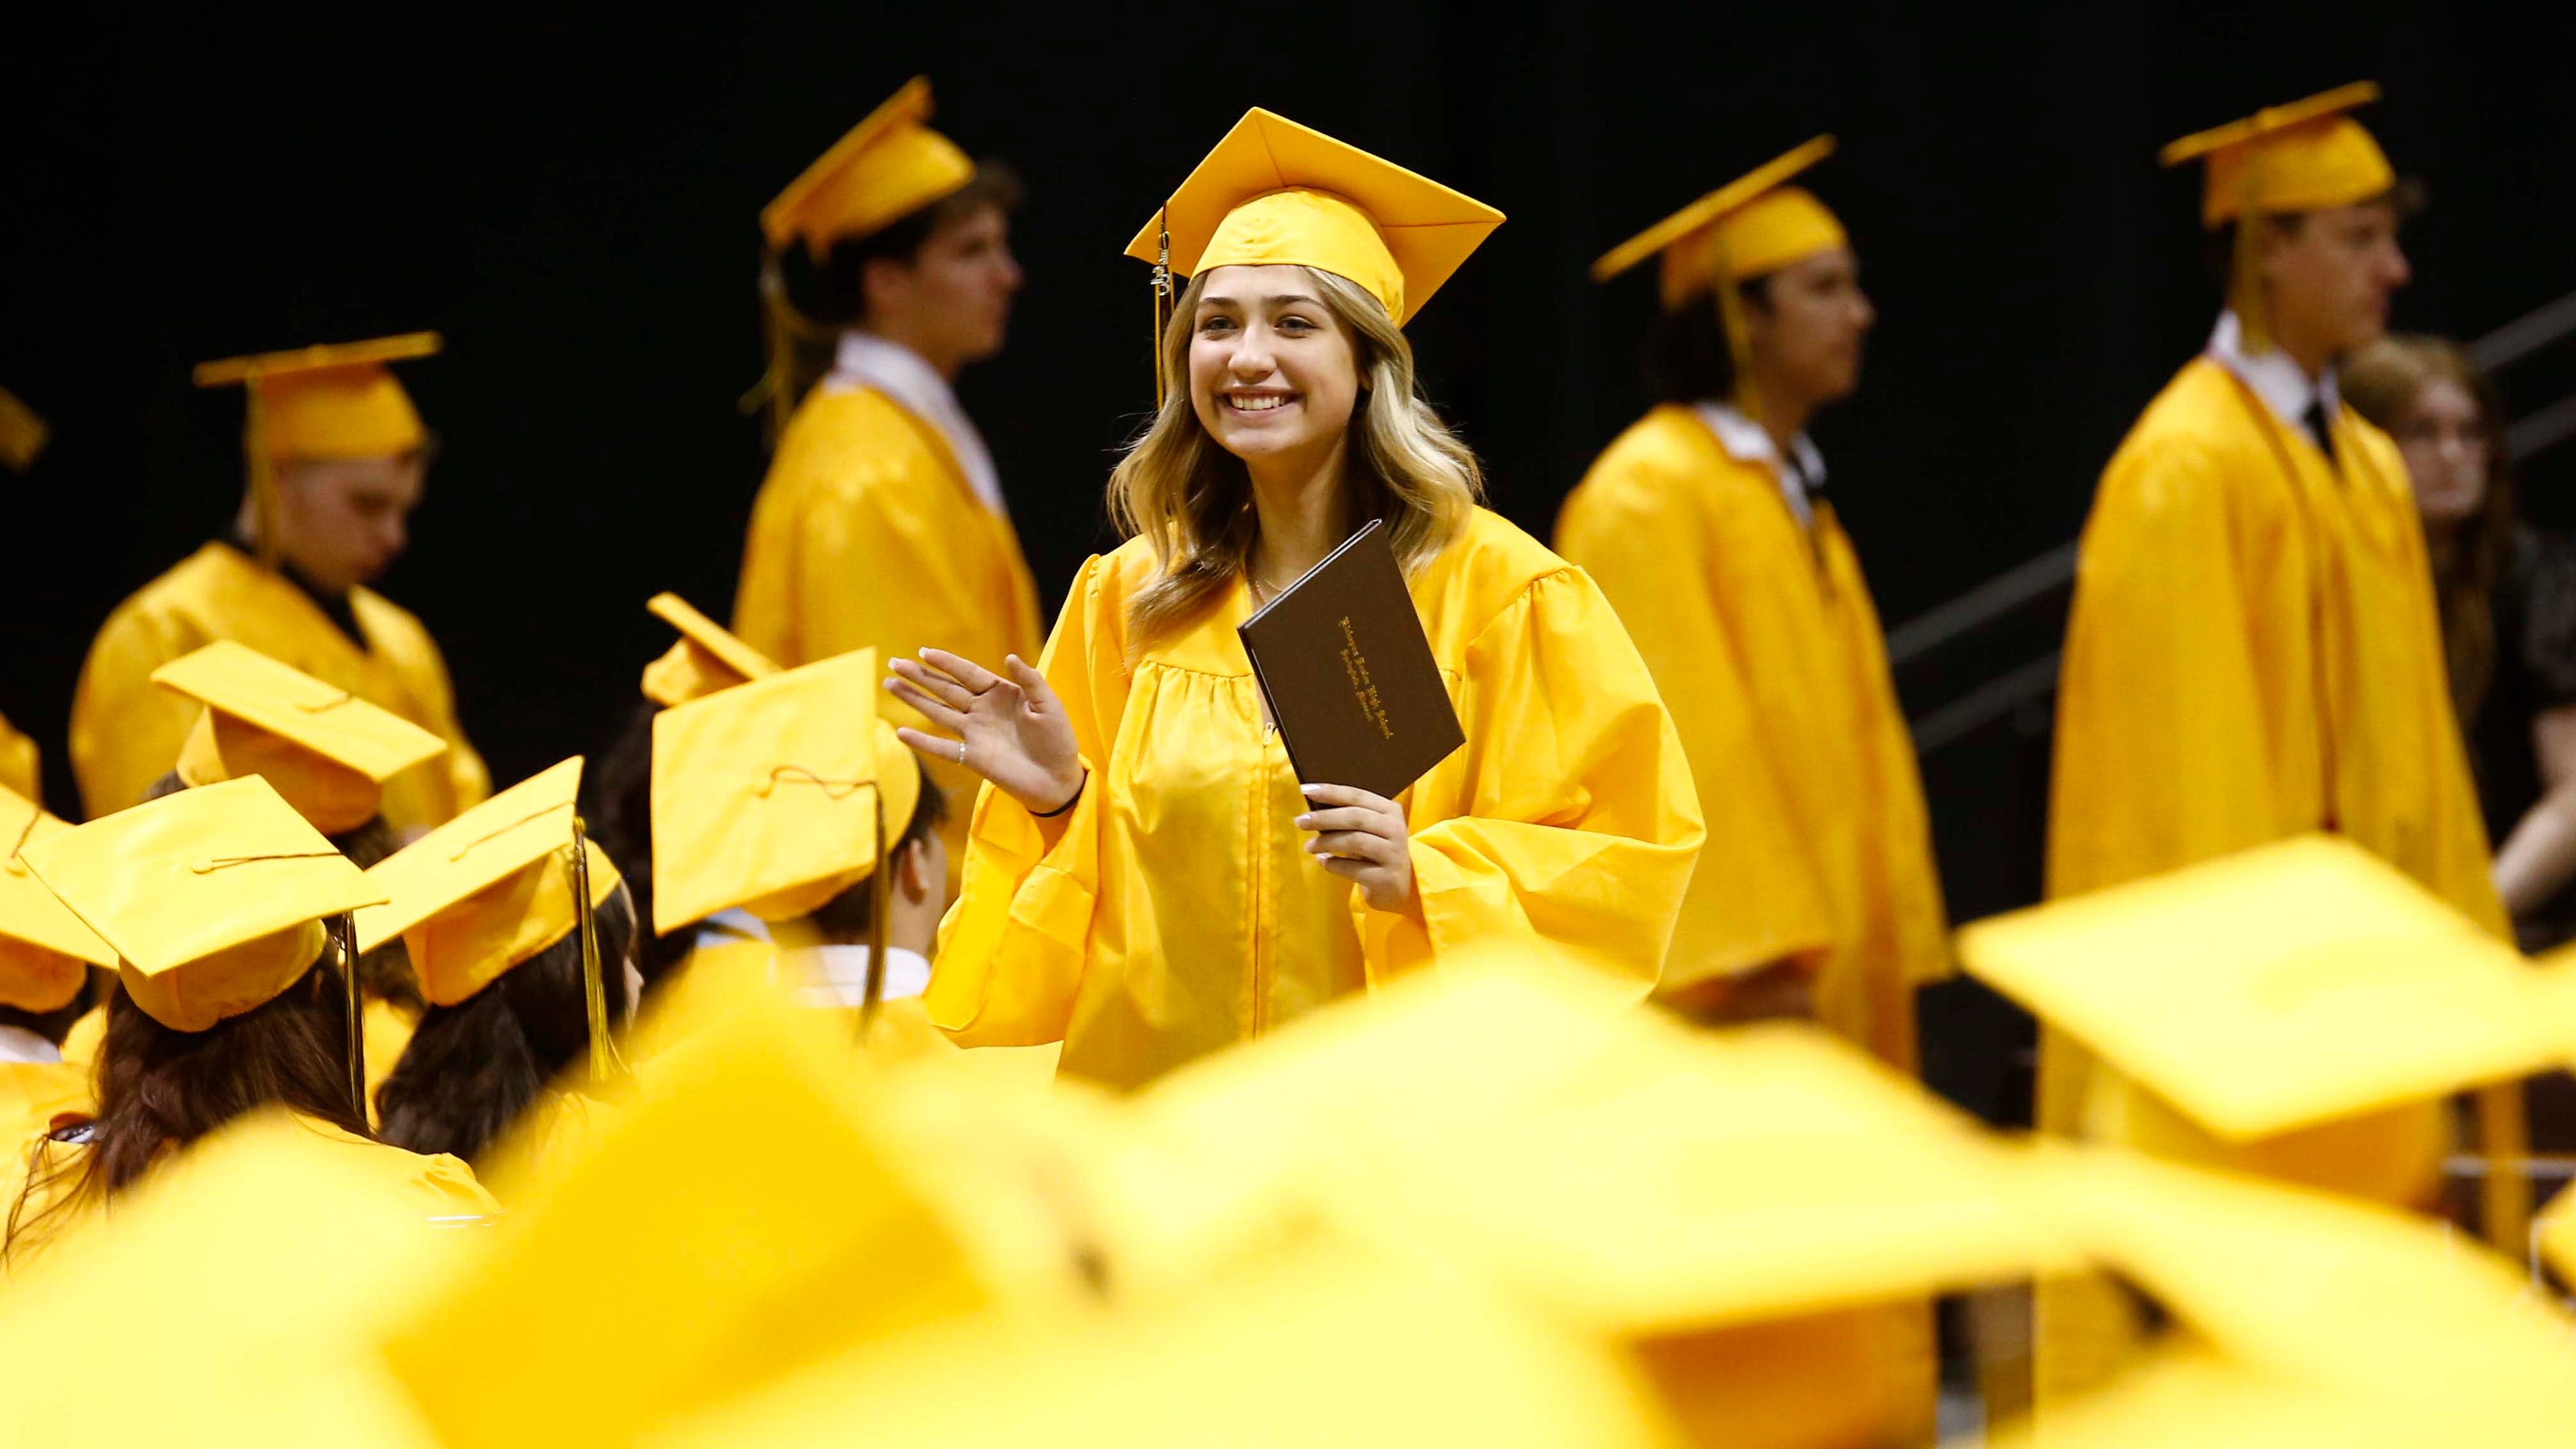 Attending a Springfield high school graduation? Here's what not to bring